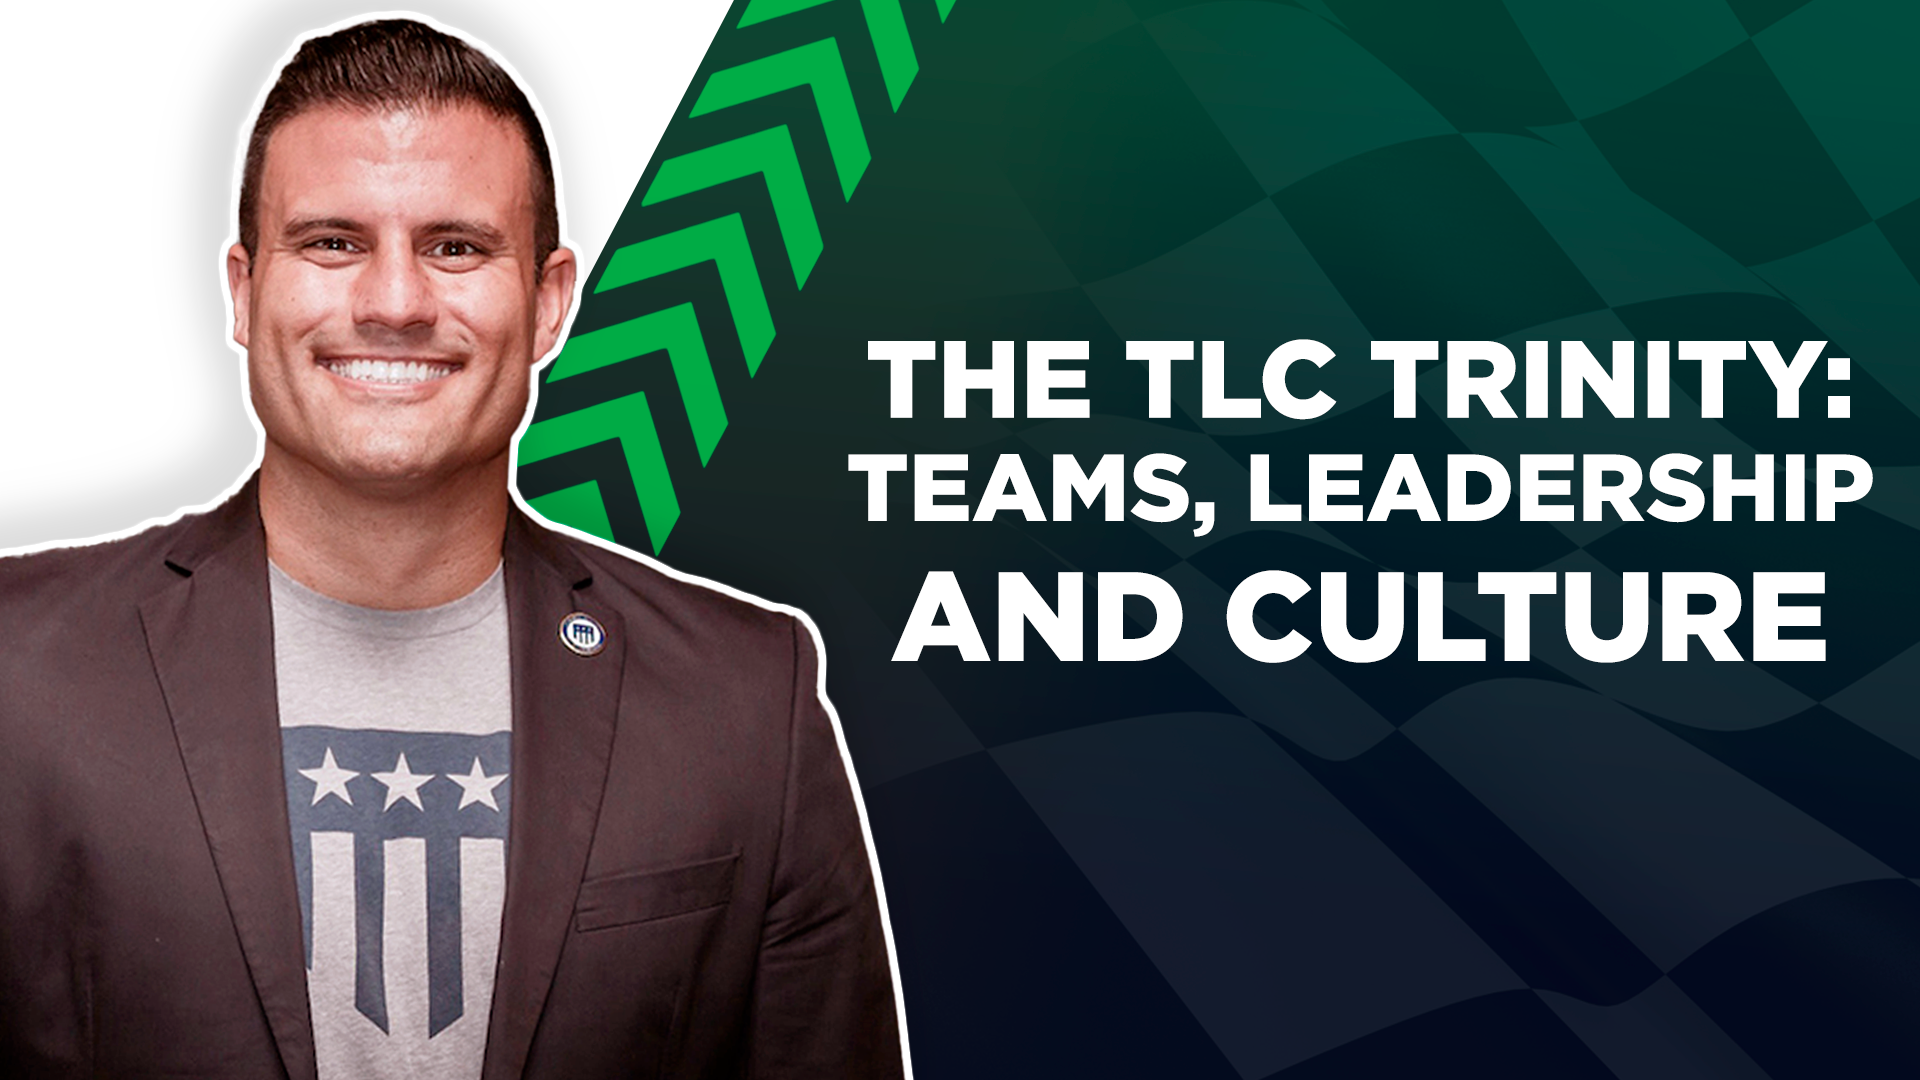 Podcast Pit Stop: Joe Musselman on The TLC Trinity:  Teams, Leadership, and Culture